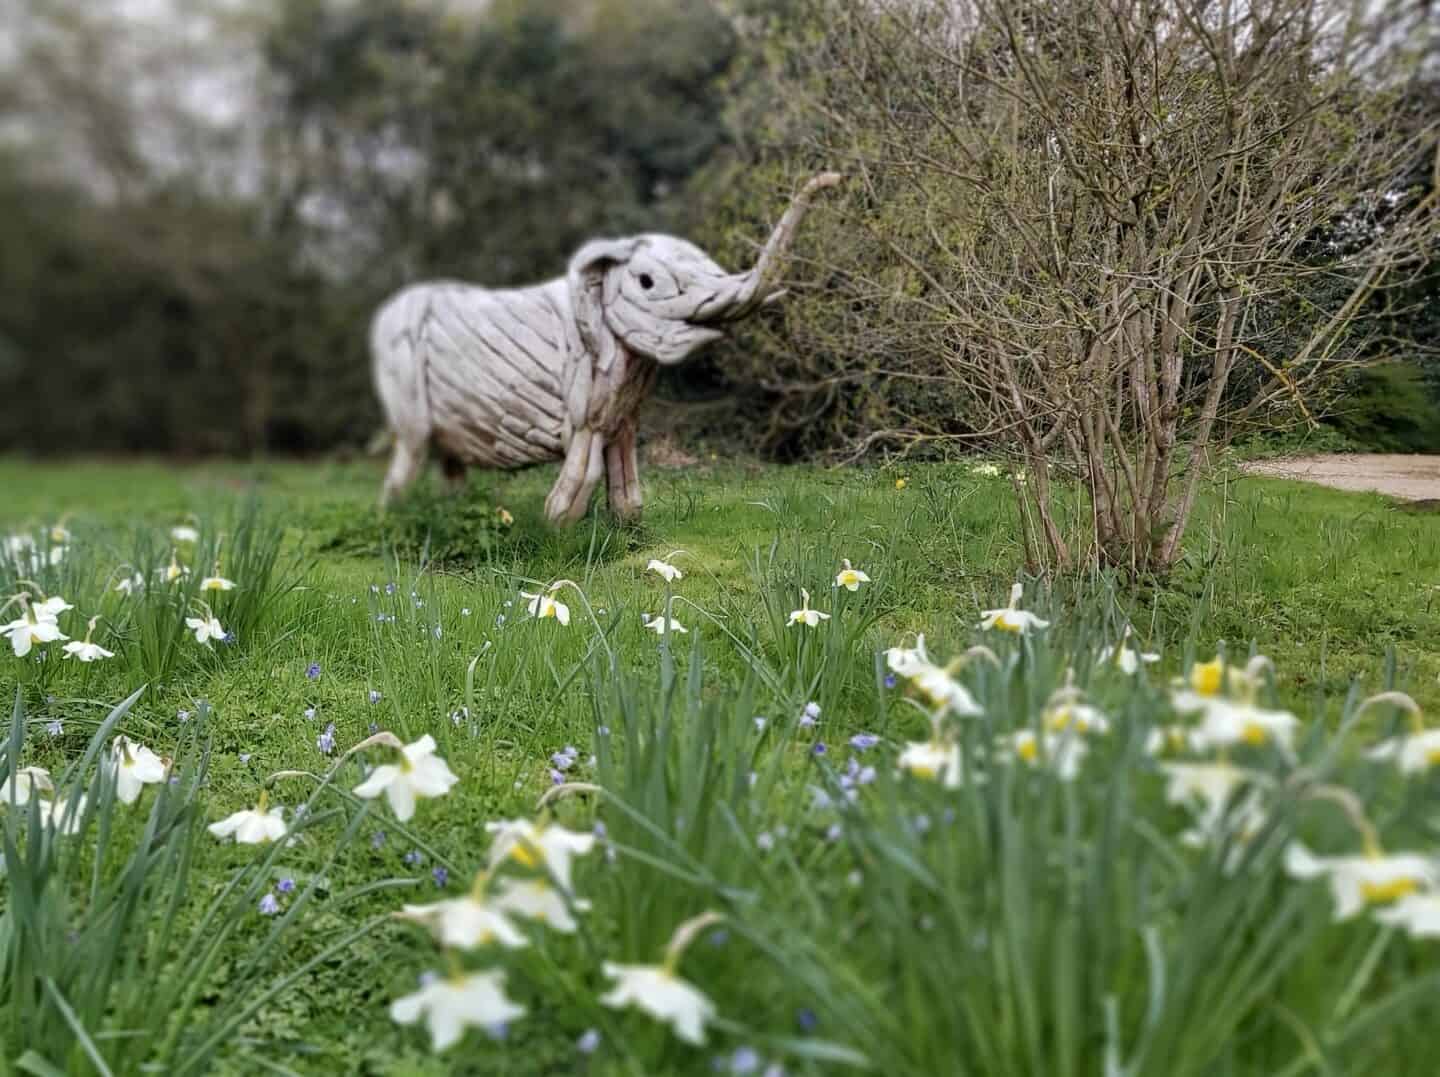 Daffodils in foreground with baby elephant sculpture behind